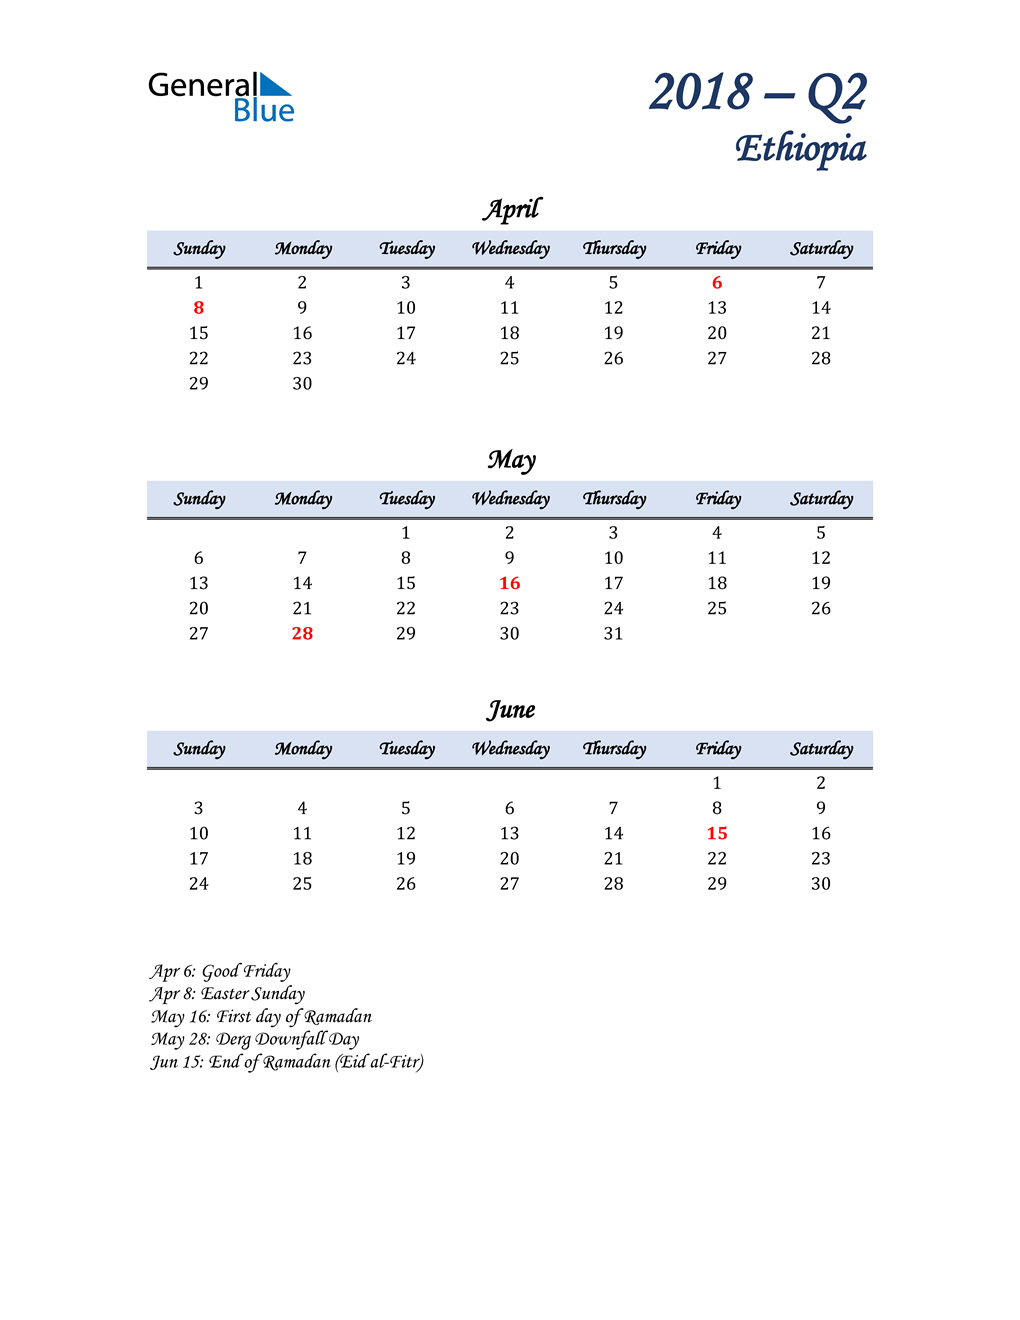  April, May, and June Calendar for Ethiopia